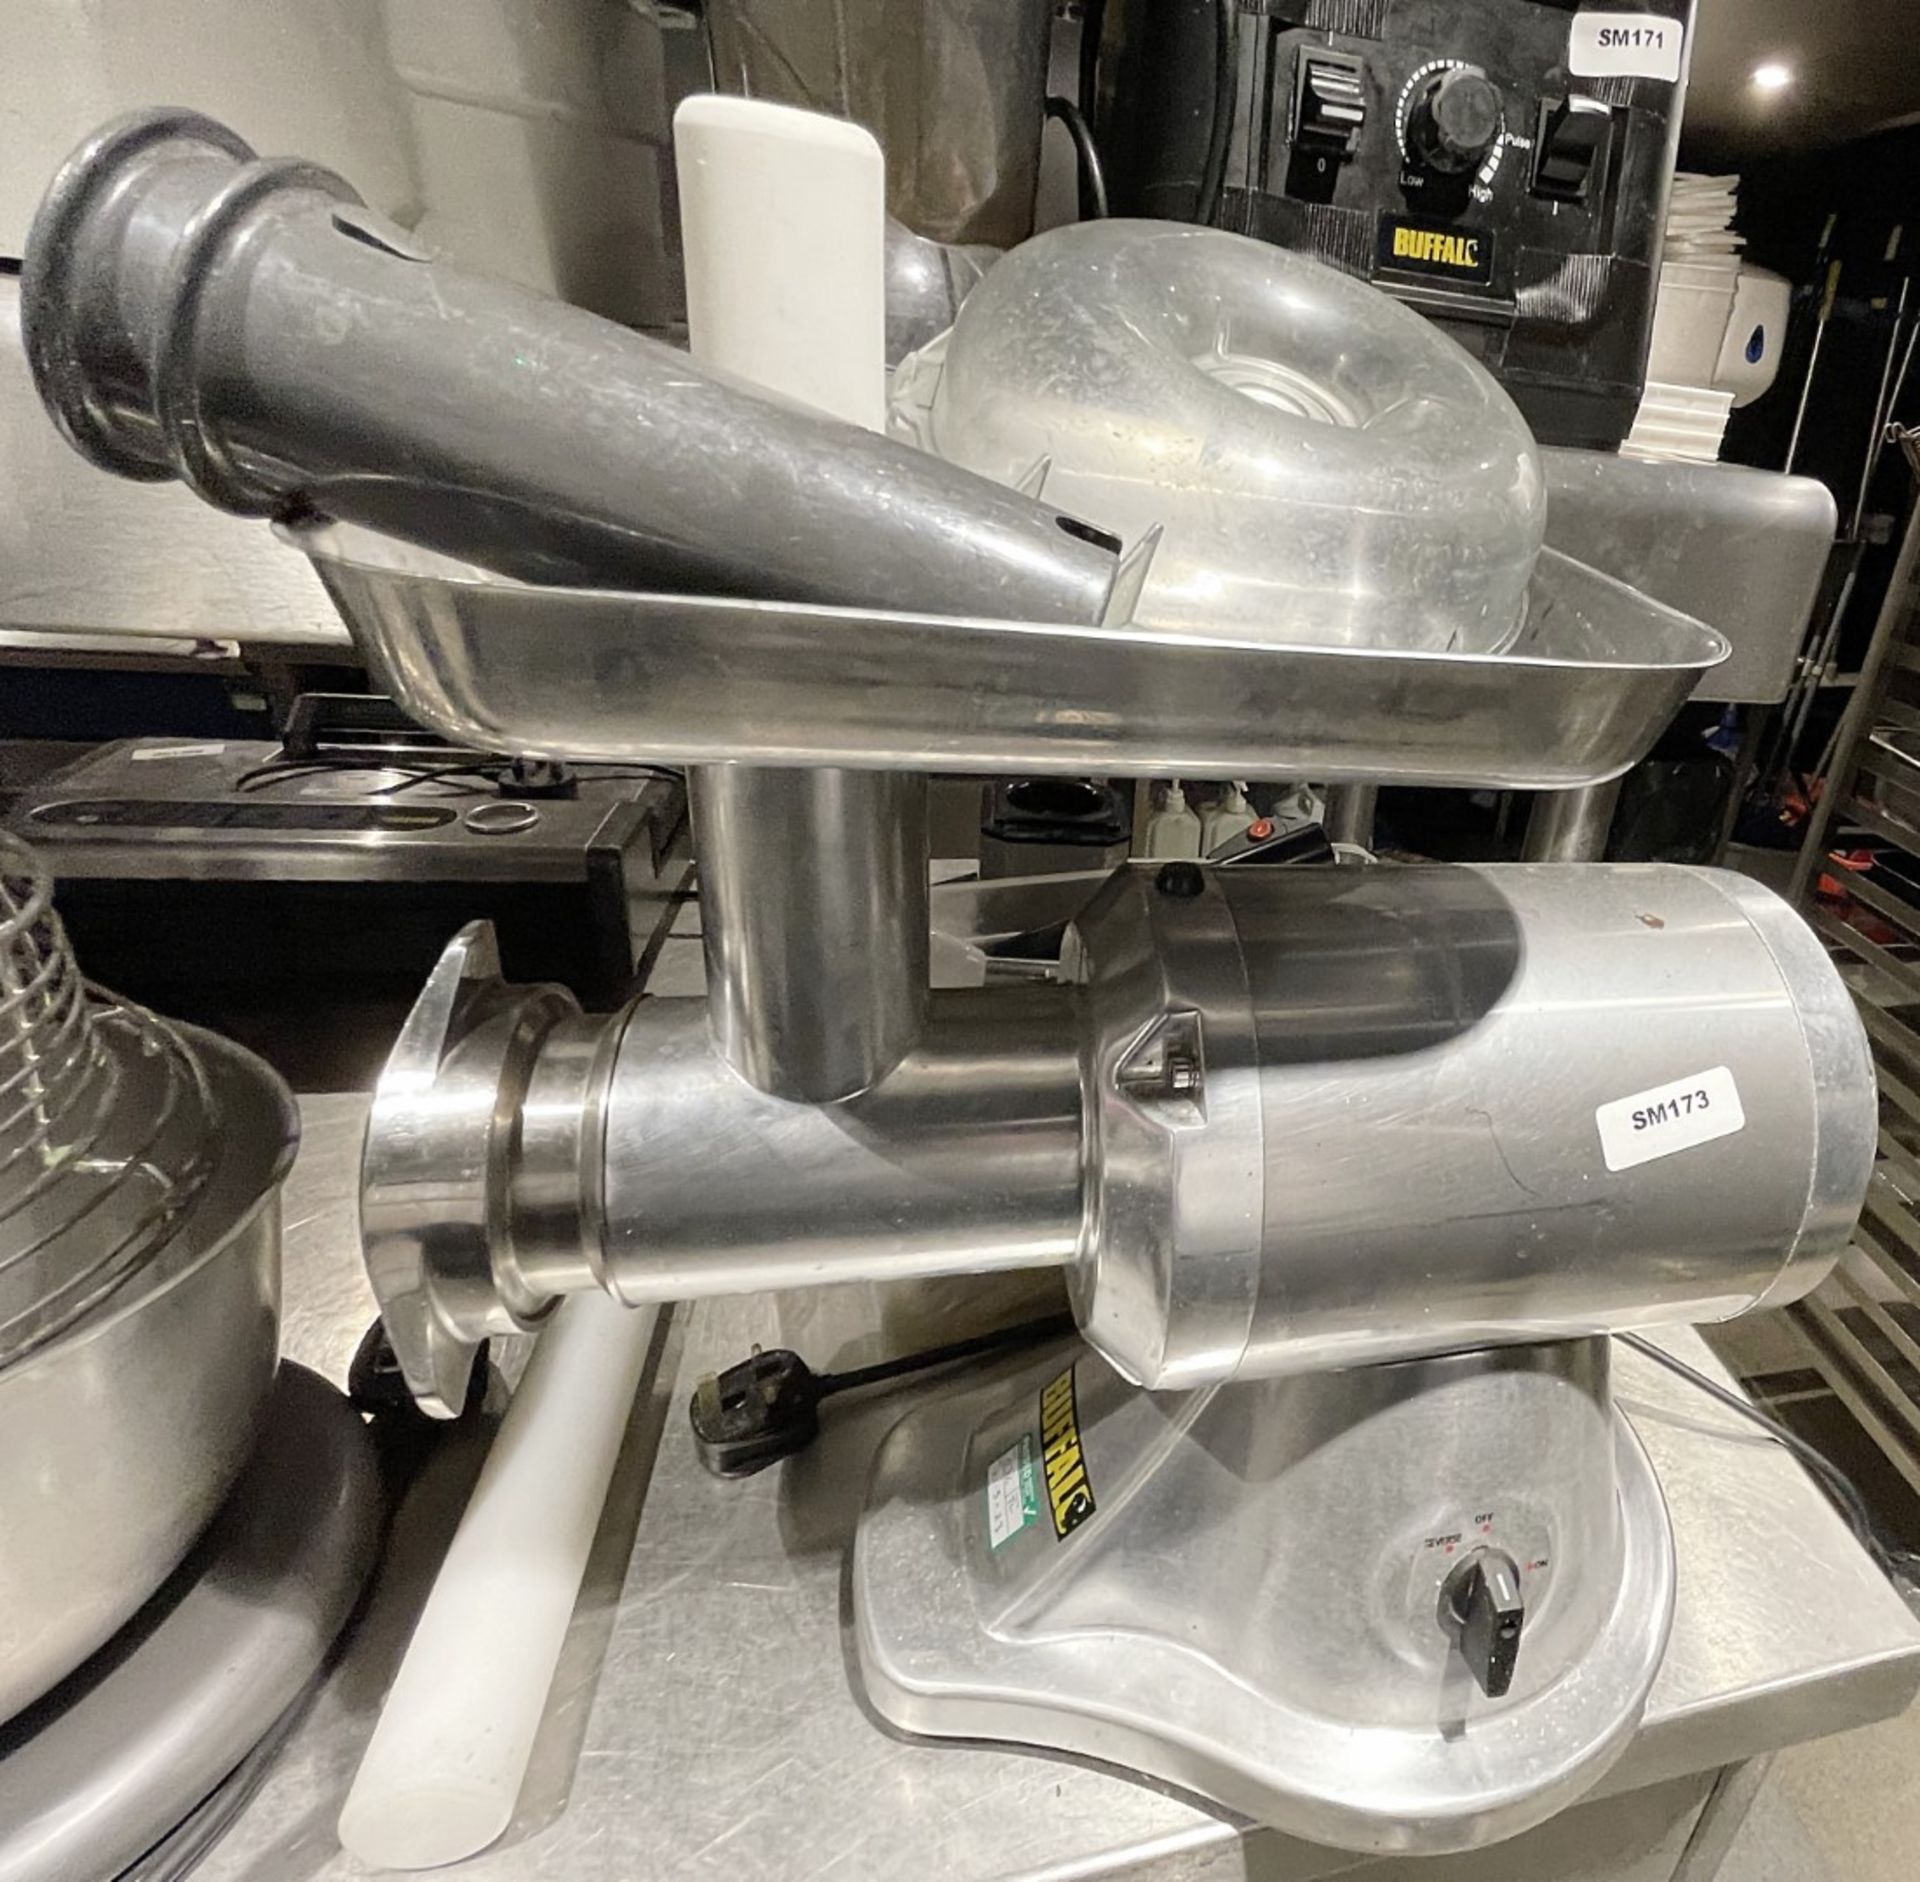 1 x Buffalo CD400 Heavy Duty Meat Mincer Commercial Mincer with Accessories - RRP £770 - Image 10 of 16